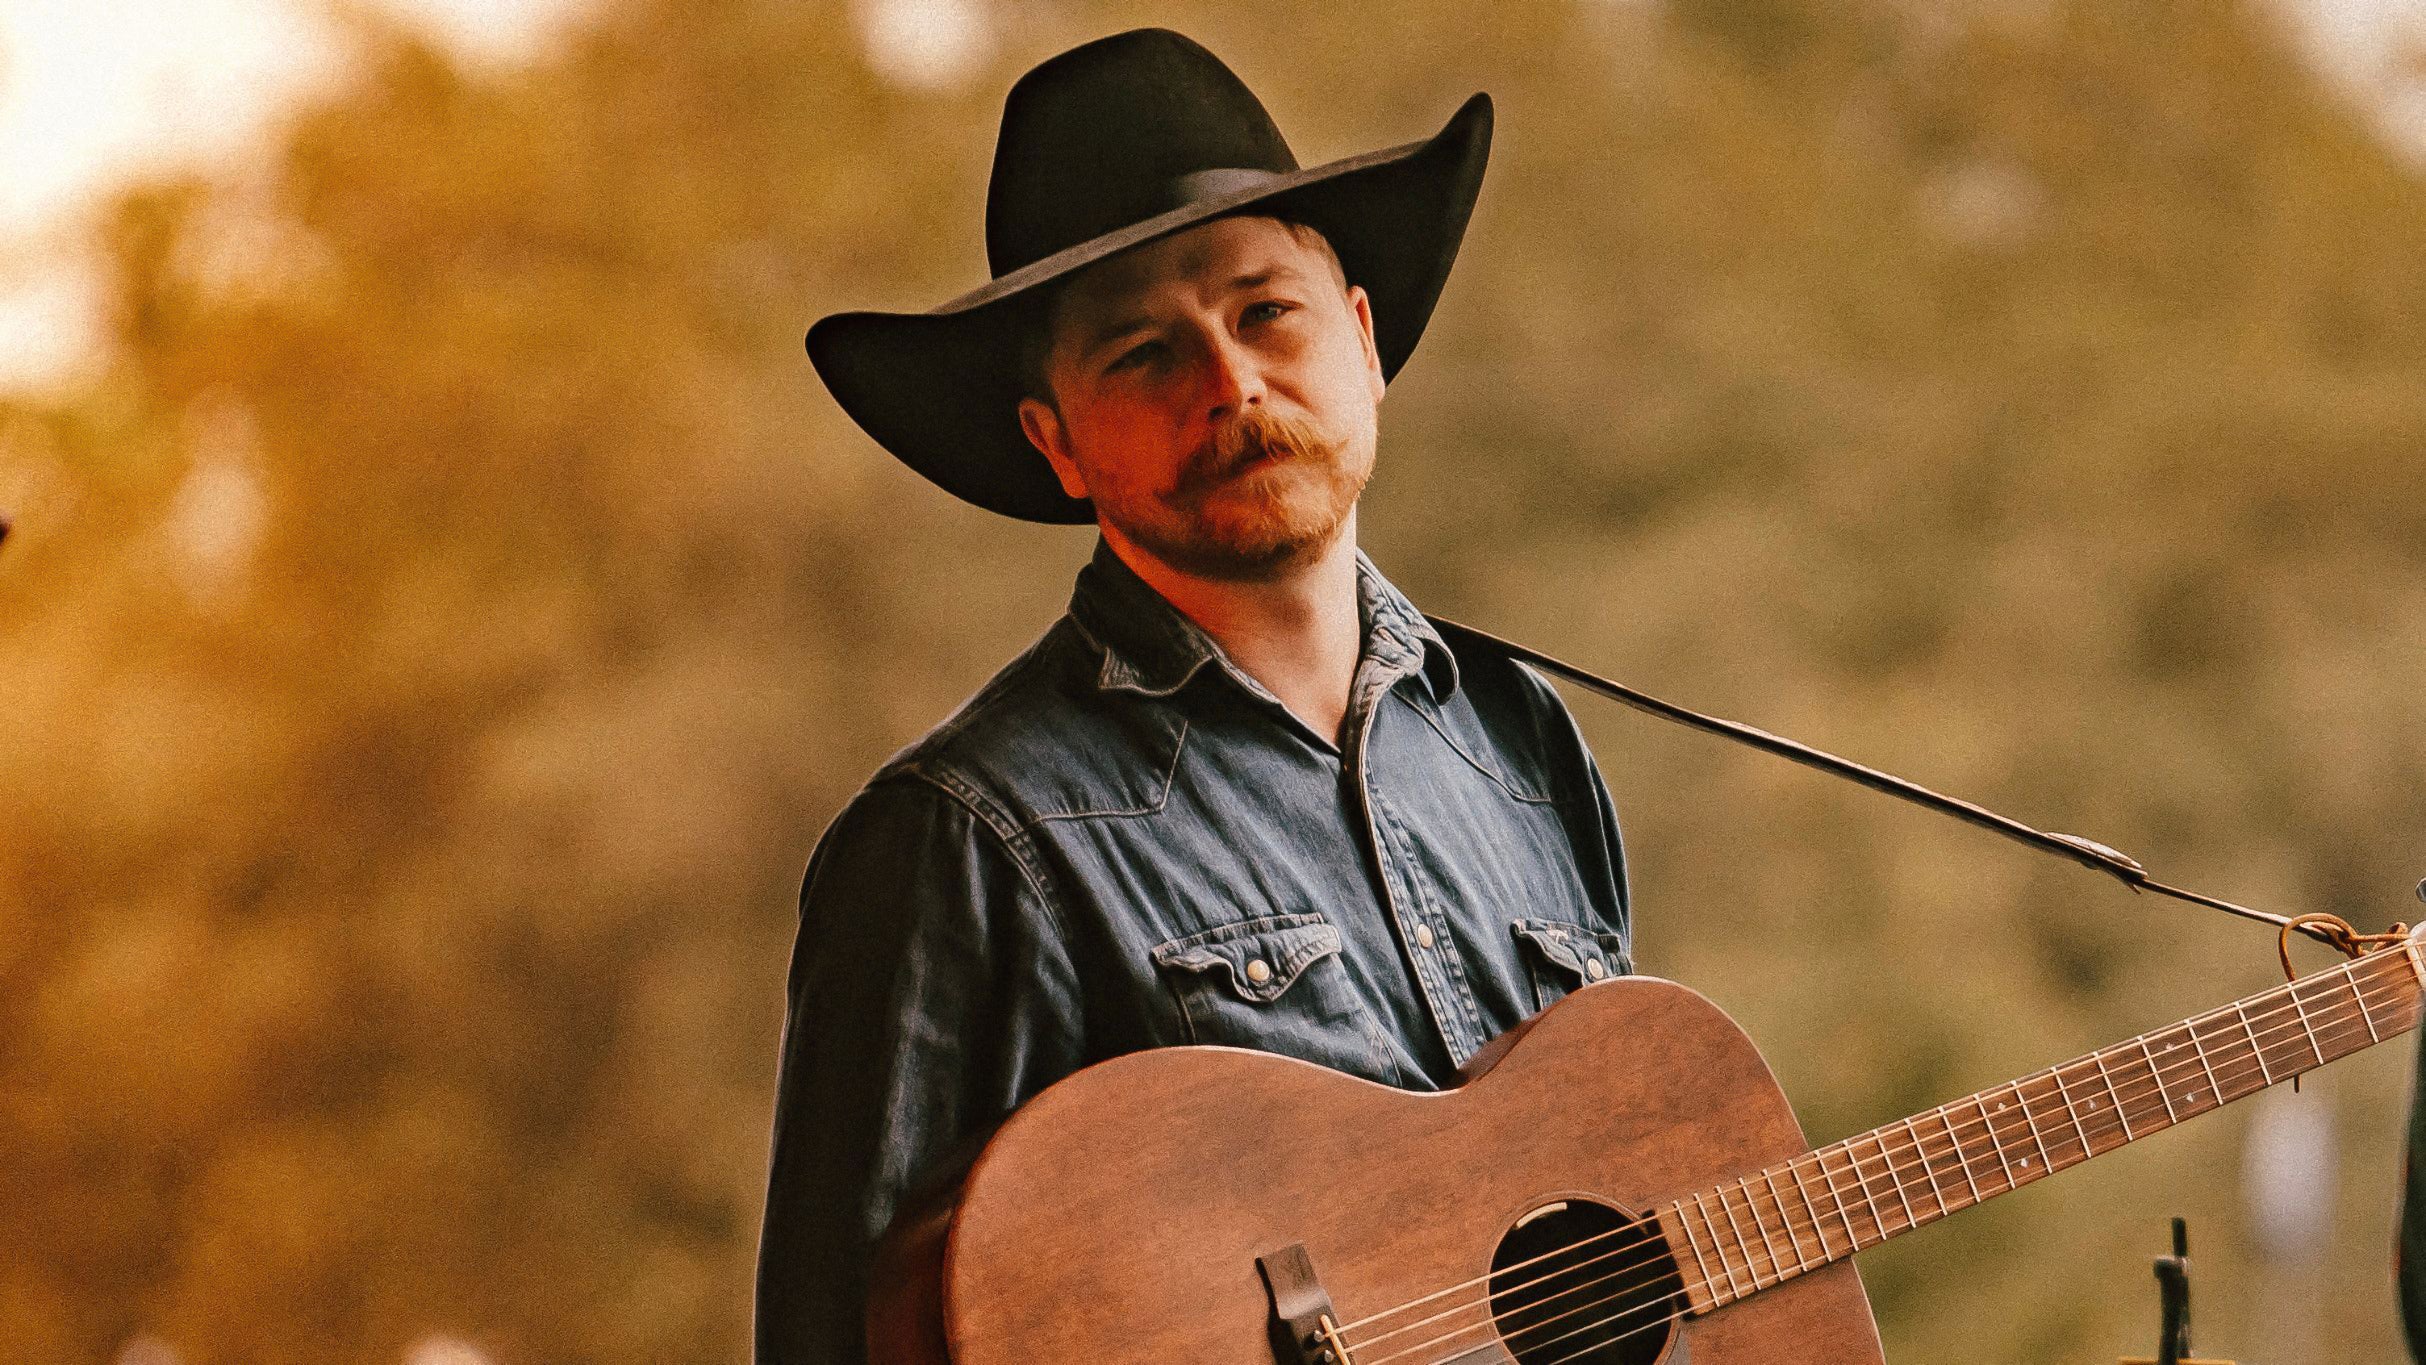 SOLD OUT - Colter Wall and Friends (Night 2) in Bonner promo photo for Colter Wall Artist presale offer code